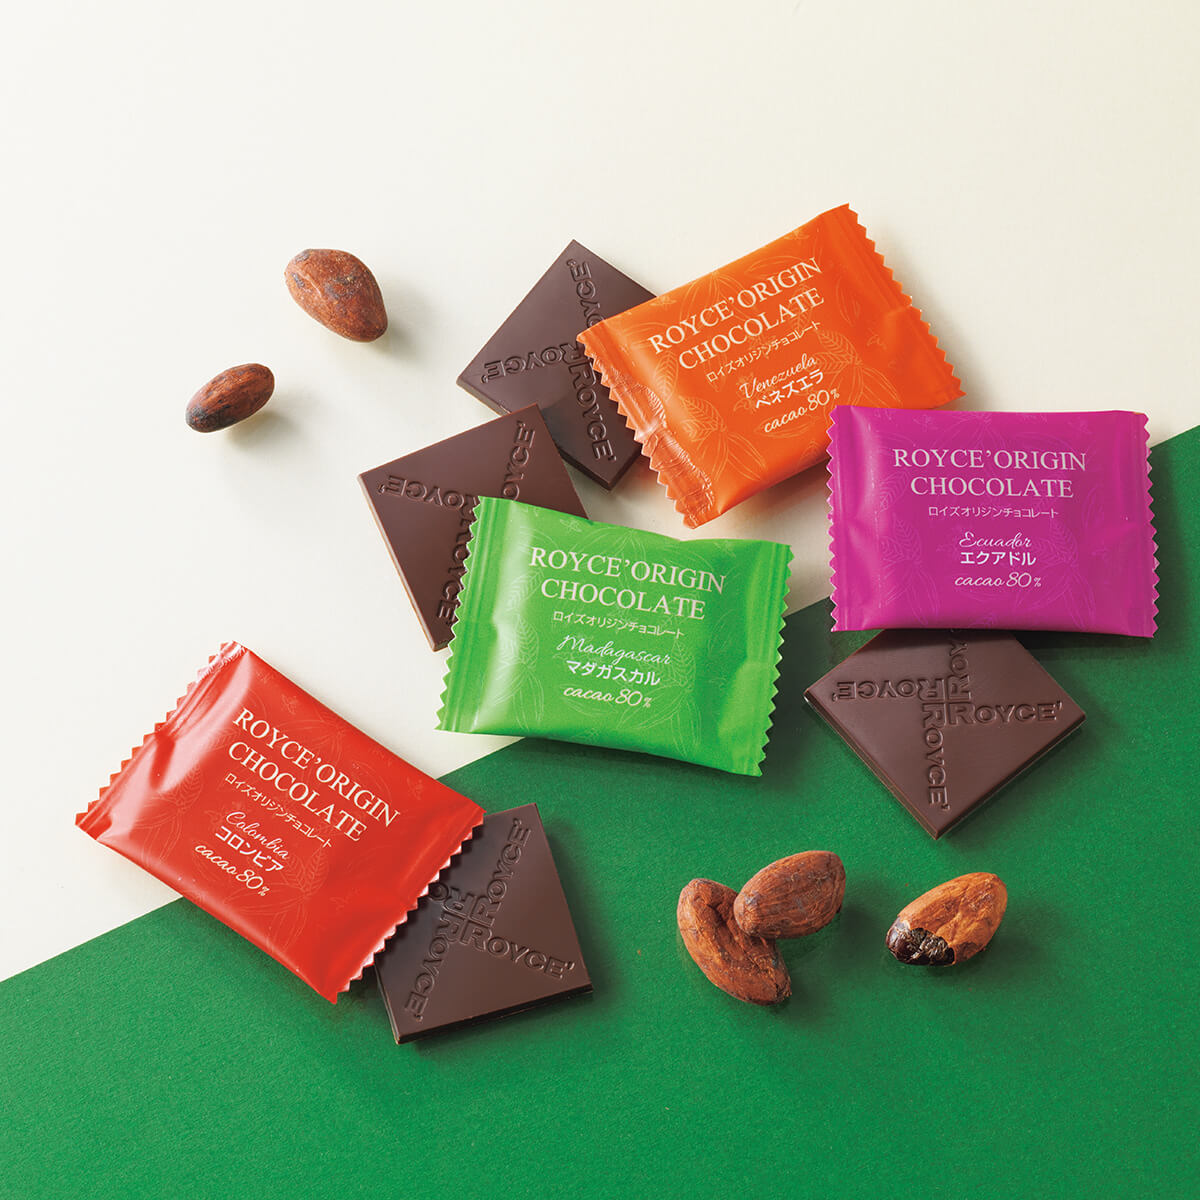 ROYCE' Chocolate - Image shows brown chocolate squares with the word ROYCE' etched on them and wrapped chocolates in red, orange, green, and pink with text saying ROYCE' Origin Chocolate. Accents include loose cacao beans.